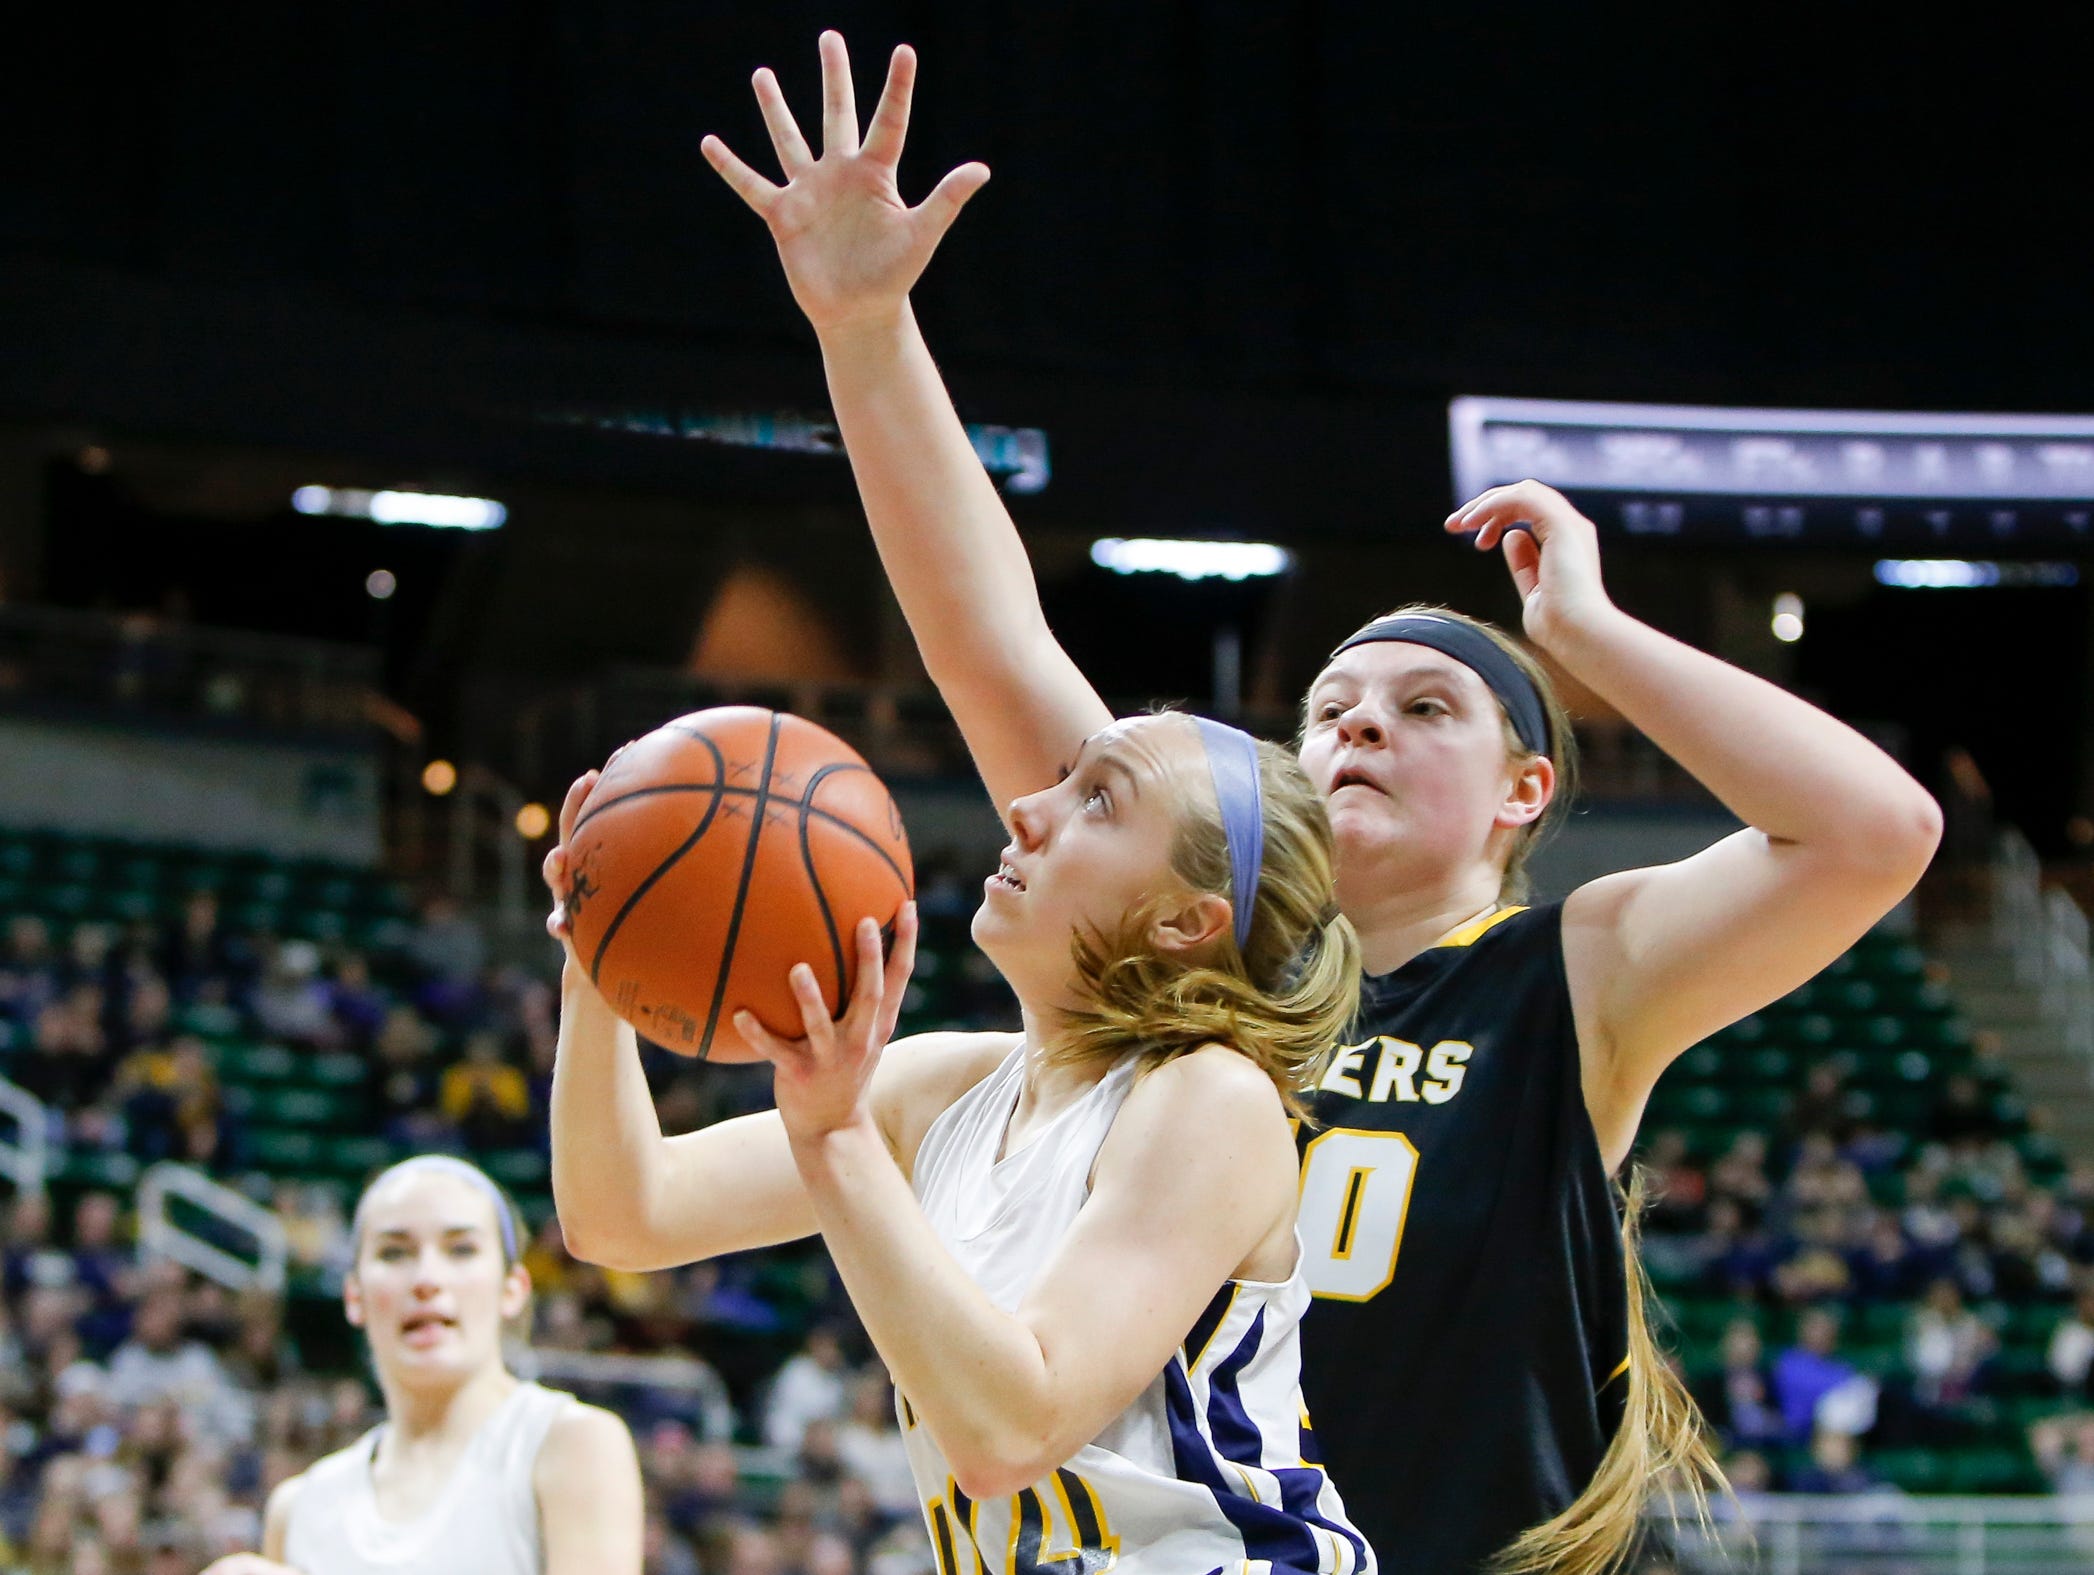 P-W's Brenna Wirth draws a foul against Maple City Glen Lake's Kaitlyn Schaub Thursday, March 16, 2017, during the Class B Semifinal at the Breslin in East Lansing. P-W won 64-51.